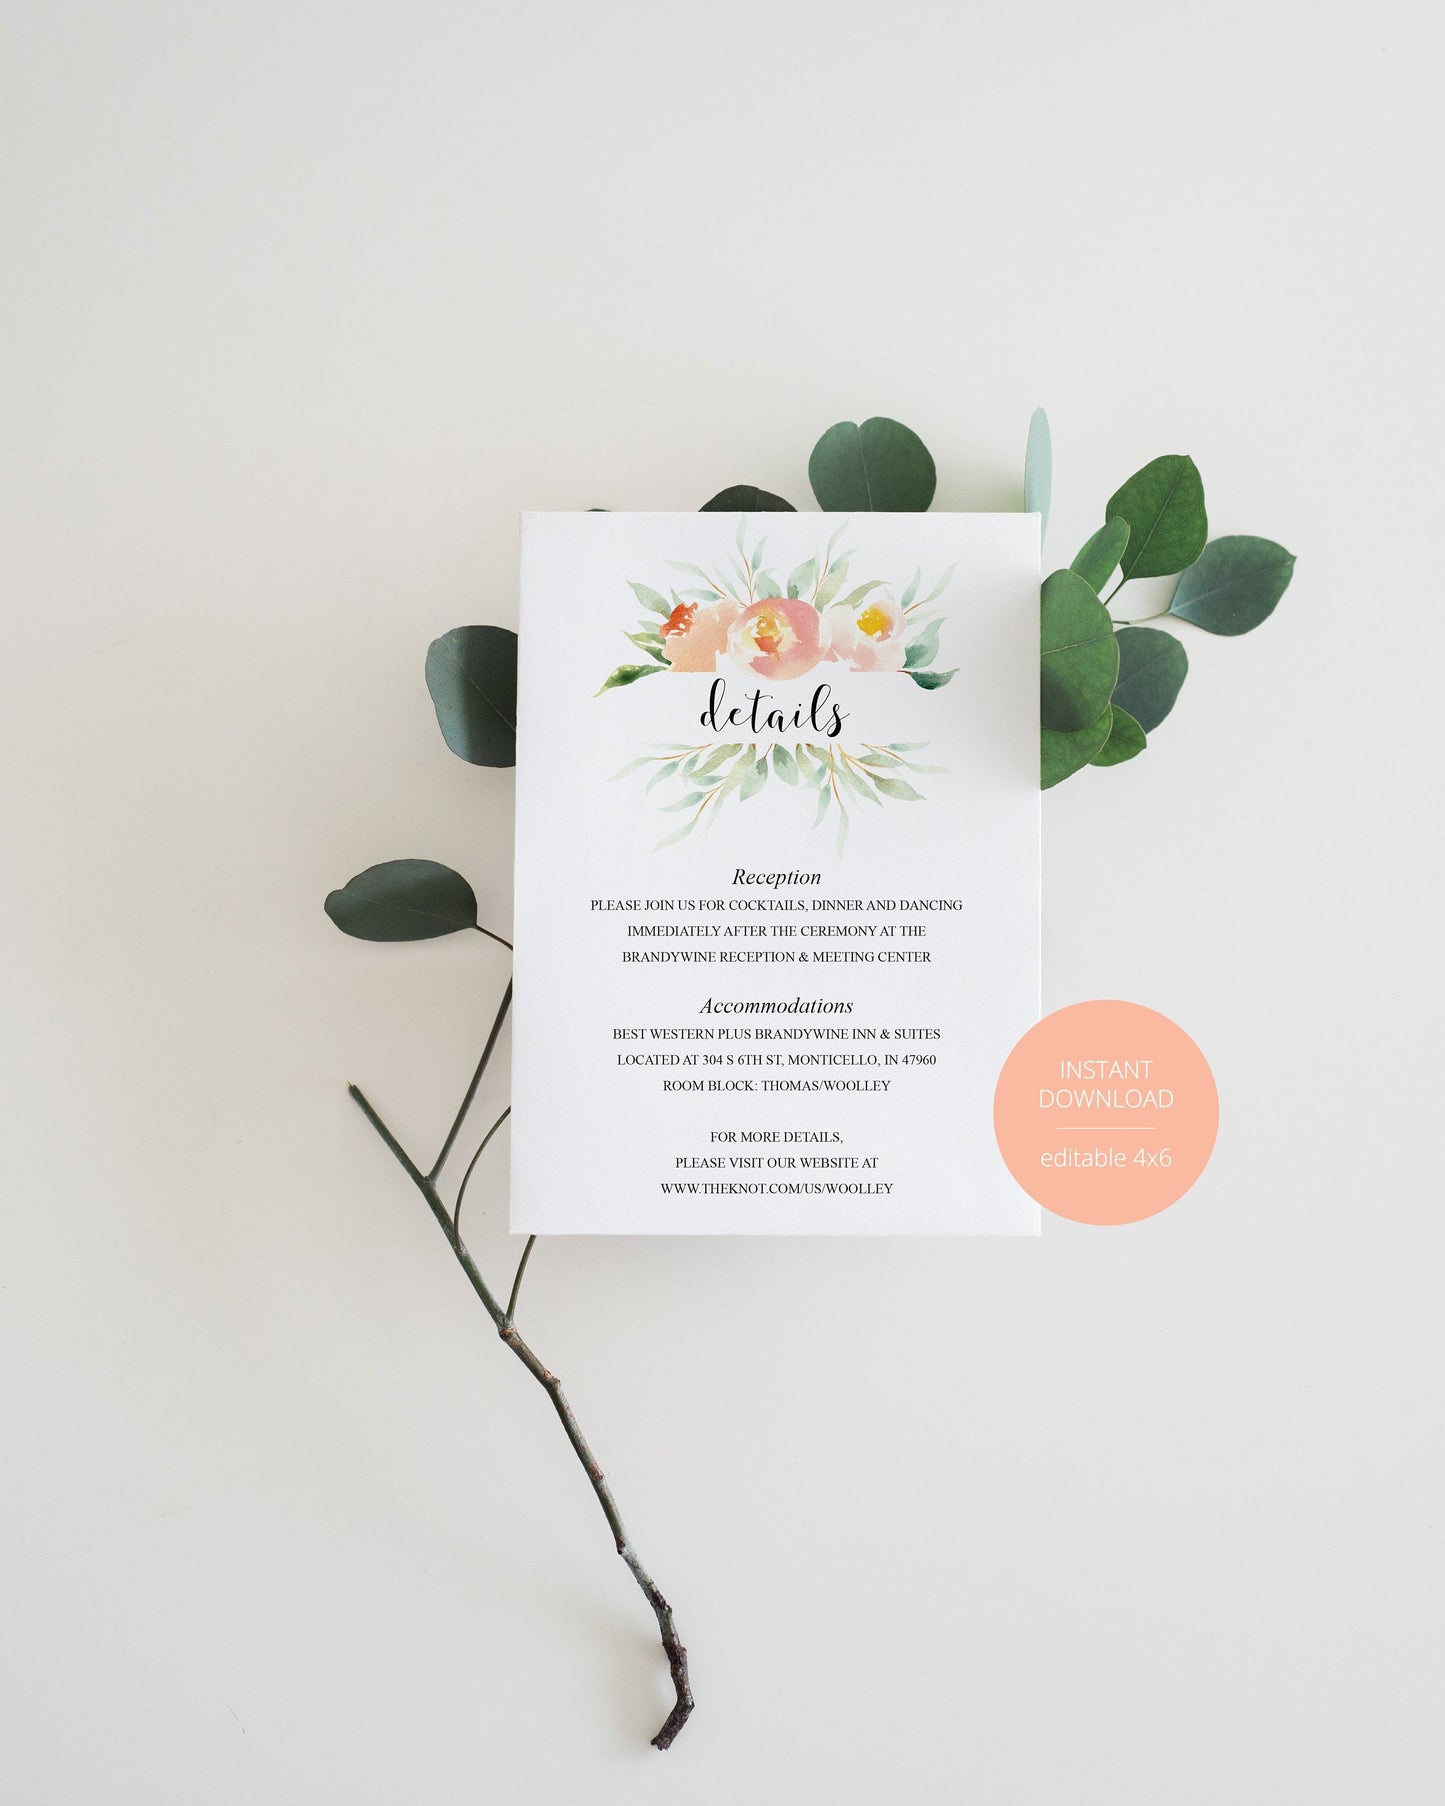 Wedding Details Card Template, Instant Download, Information Card, Wedding Info Card, Rustic Wedding,Details Template, Blush  - Sarah RSVP & DETAILS CARDS SAVVY PAPER CO